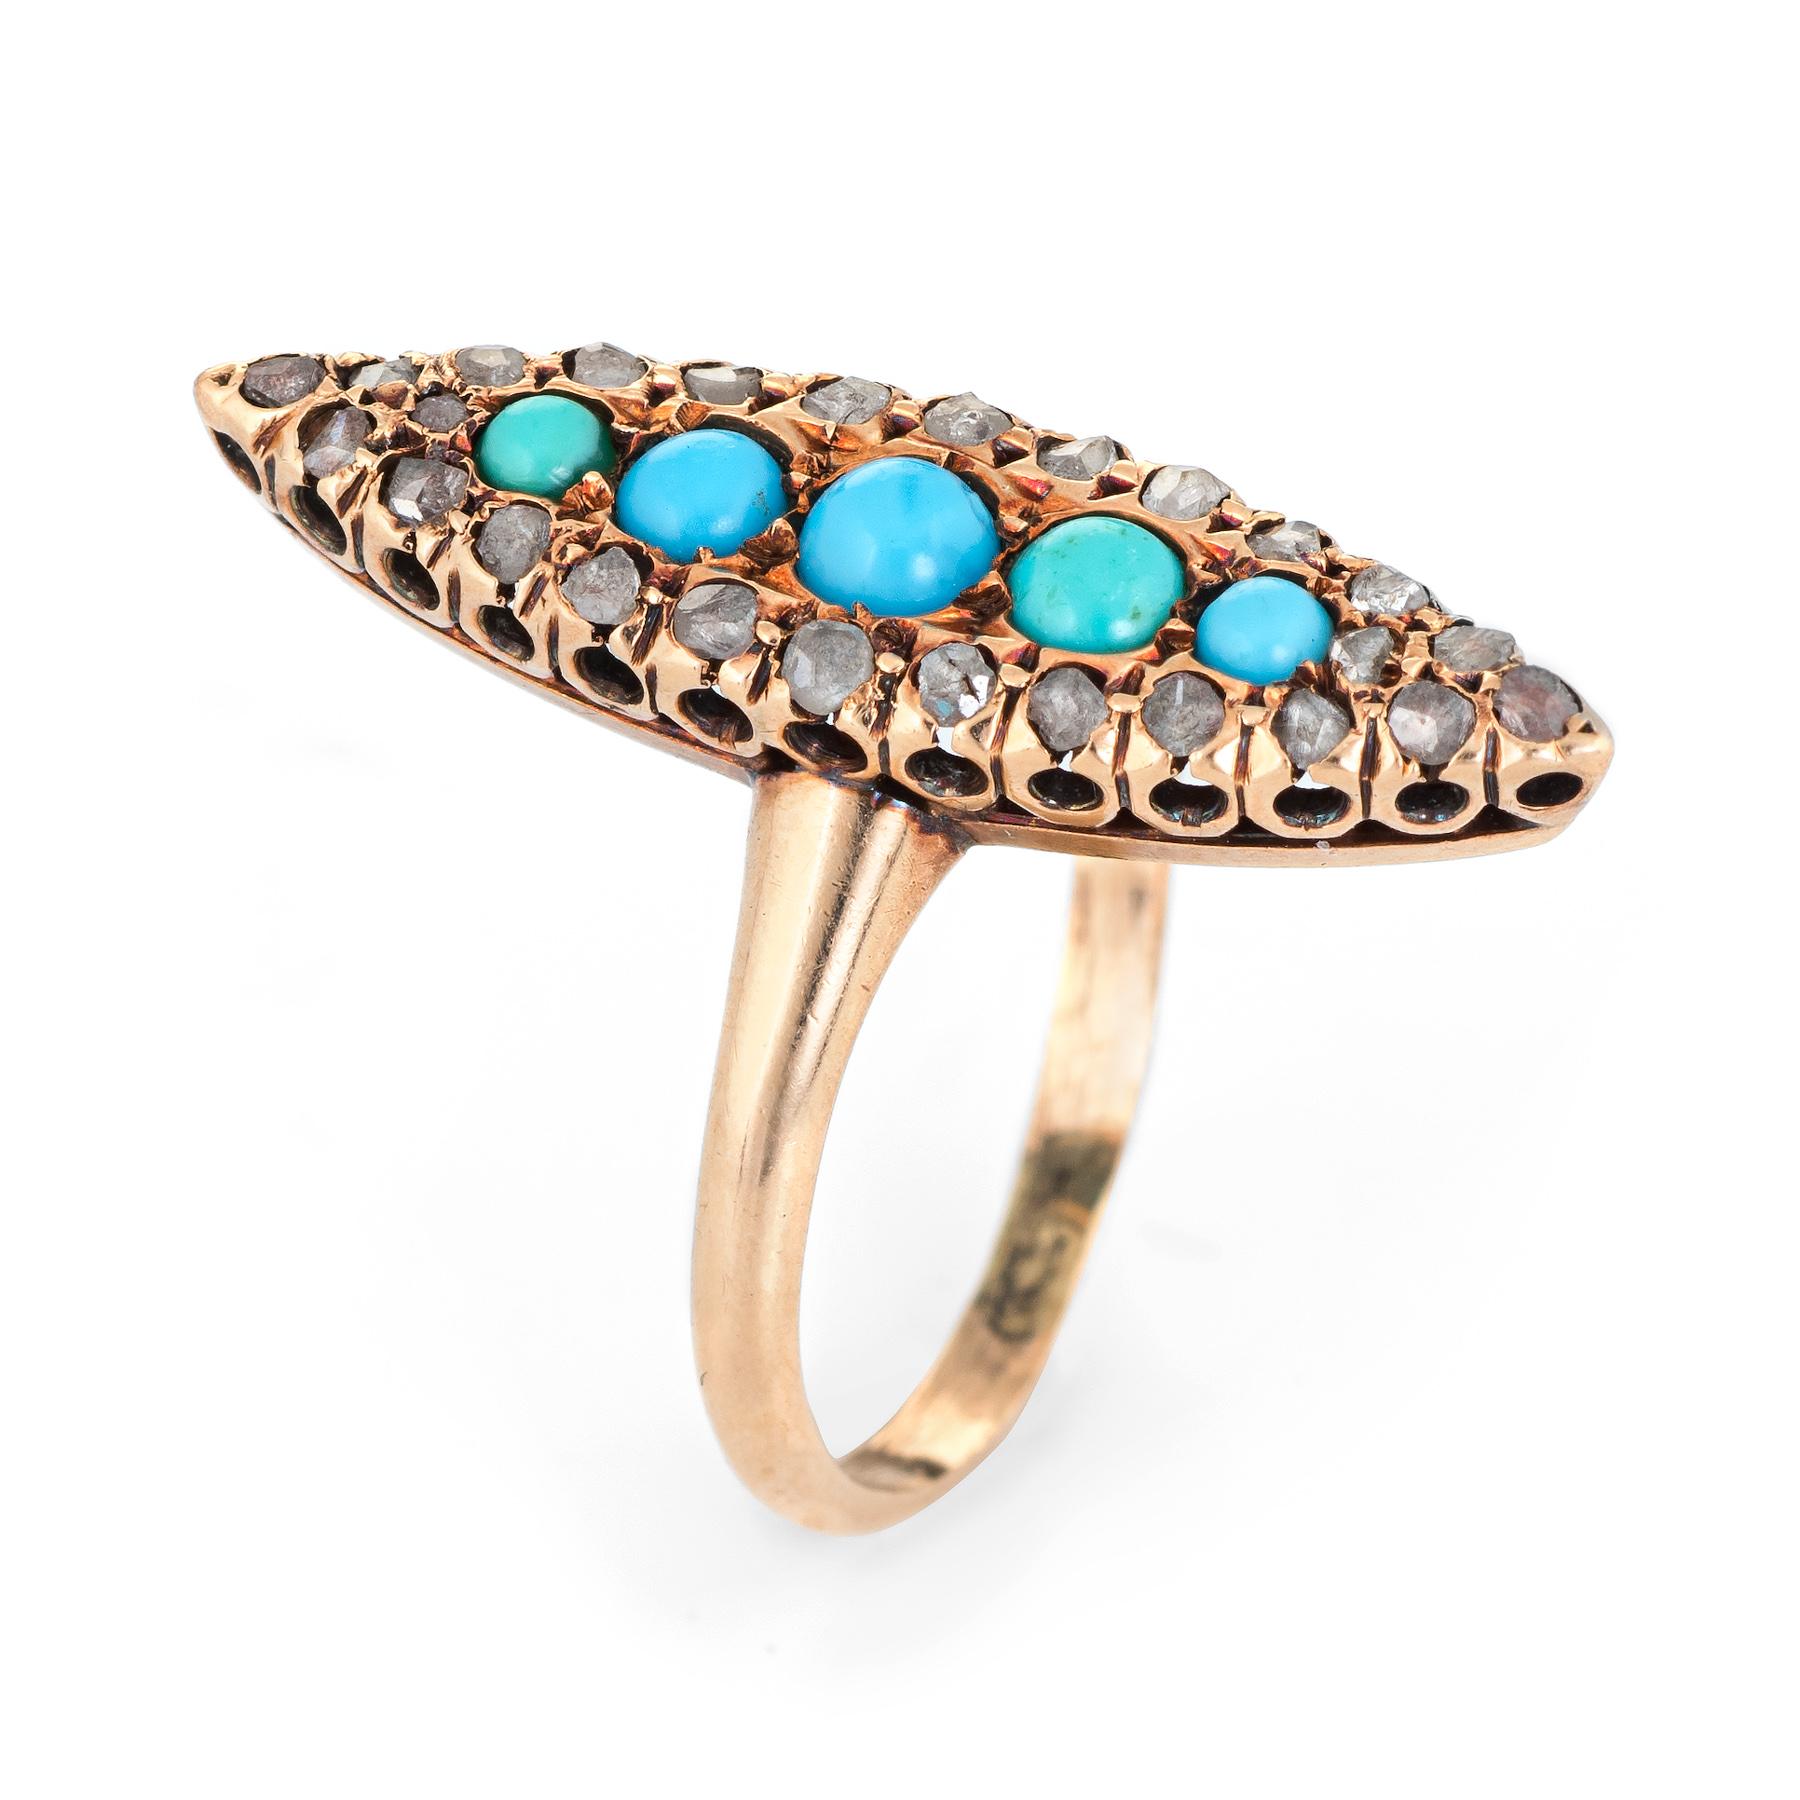 Finely detailed antique Victorian turquoise & diamond navette ring (circa 1880s to 1900s), crafted in 10 karat yellow gold. 

Centrally mounted Persian turquoise is cabochon cut and graduates in size from 2mm to 3mm. The 26 old rose cut diamonds